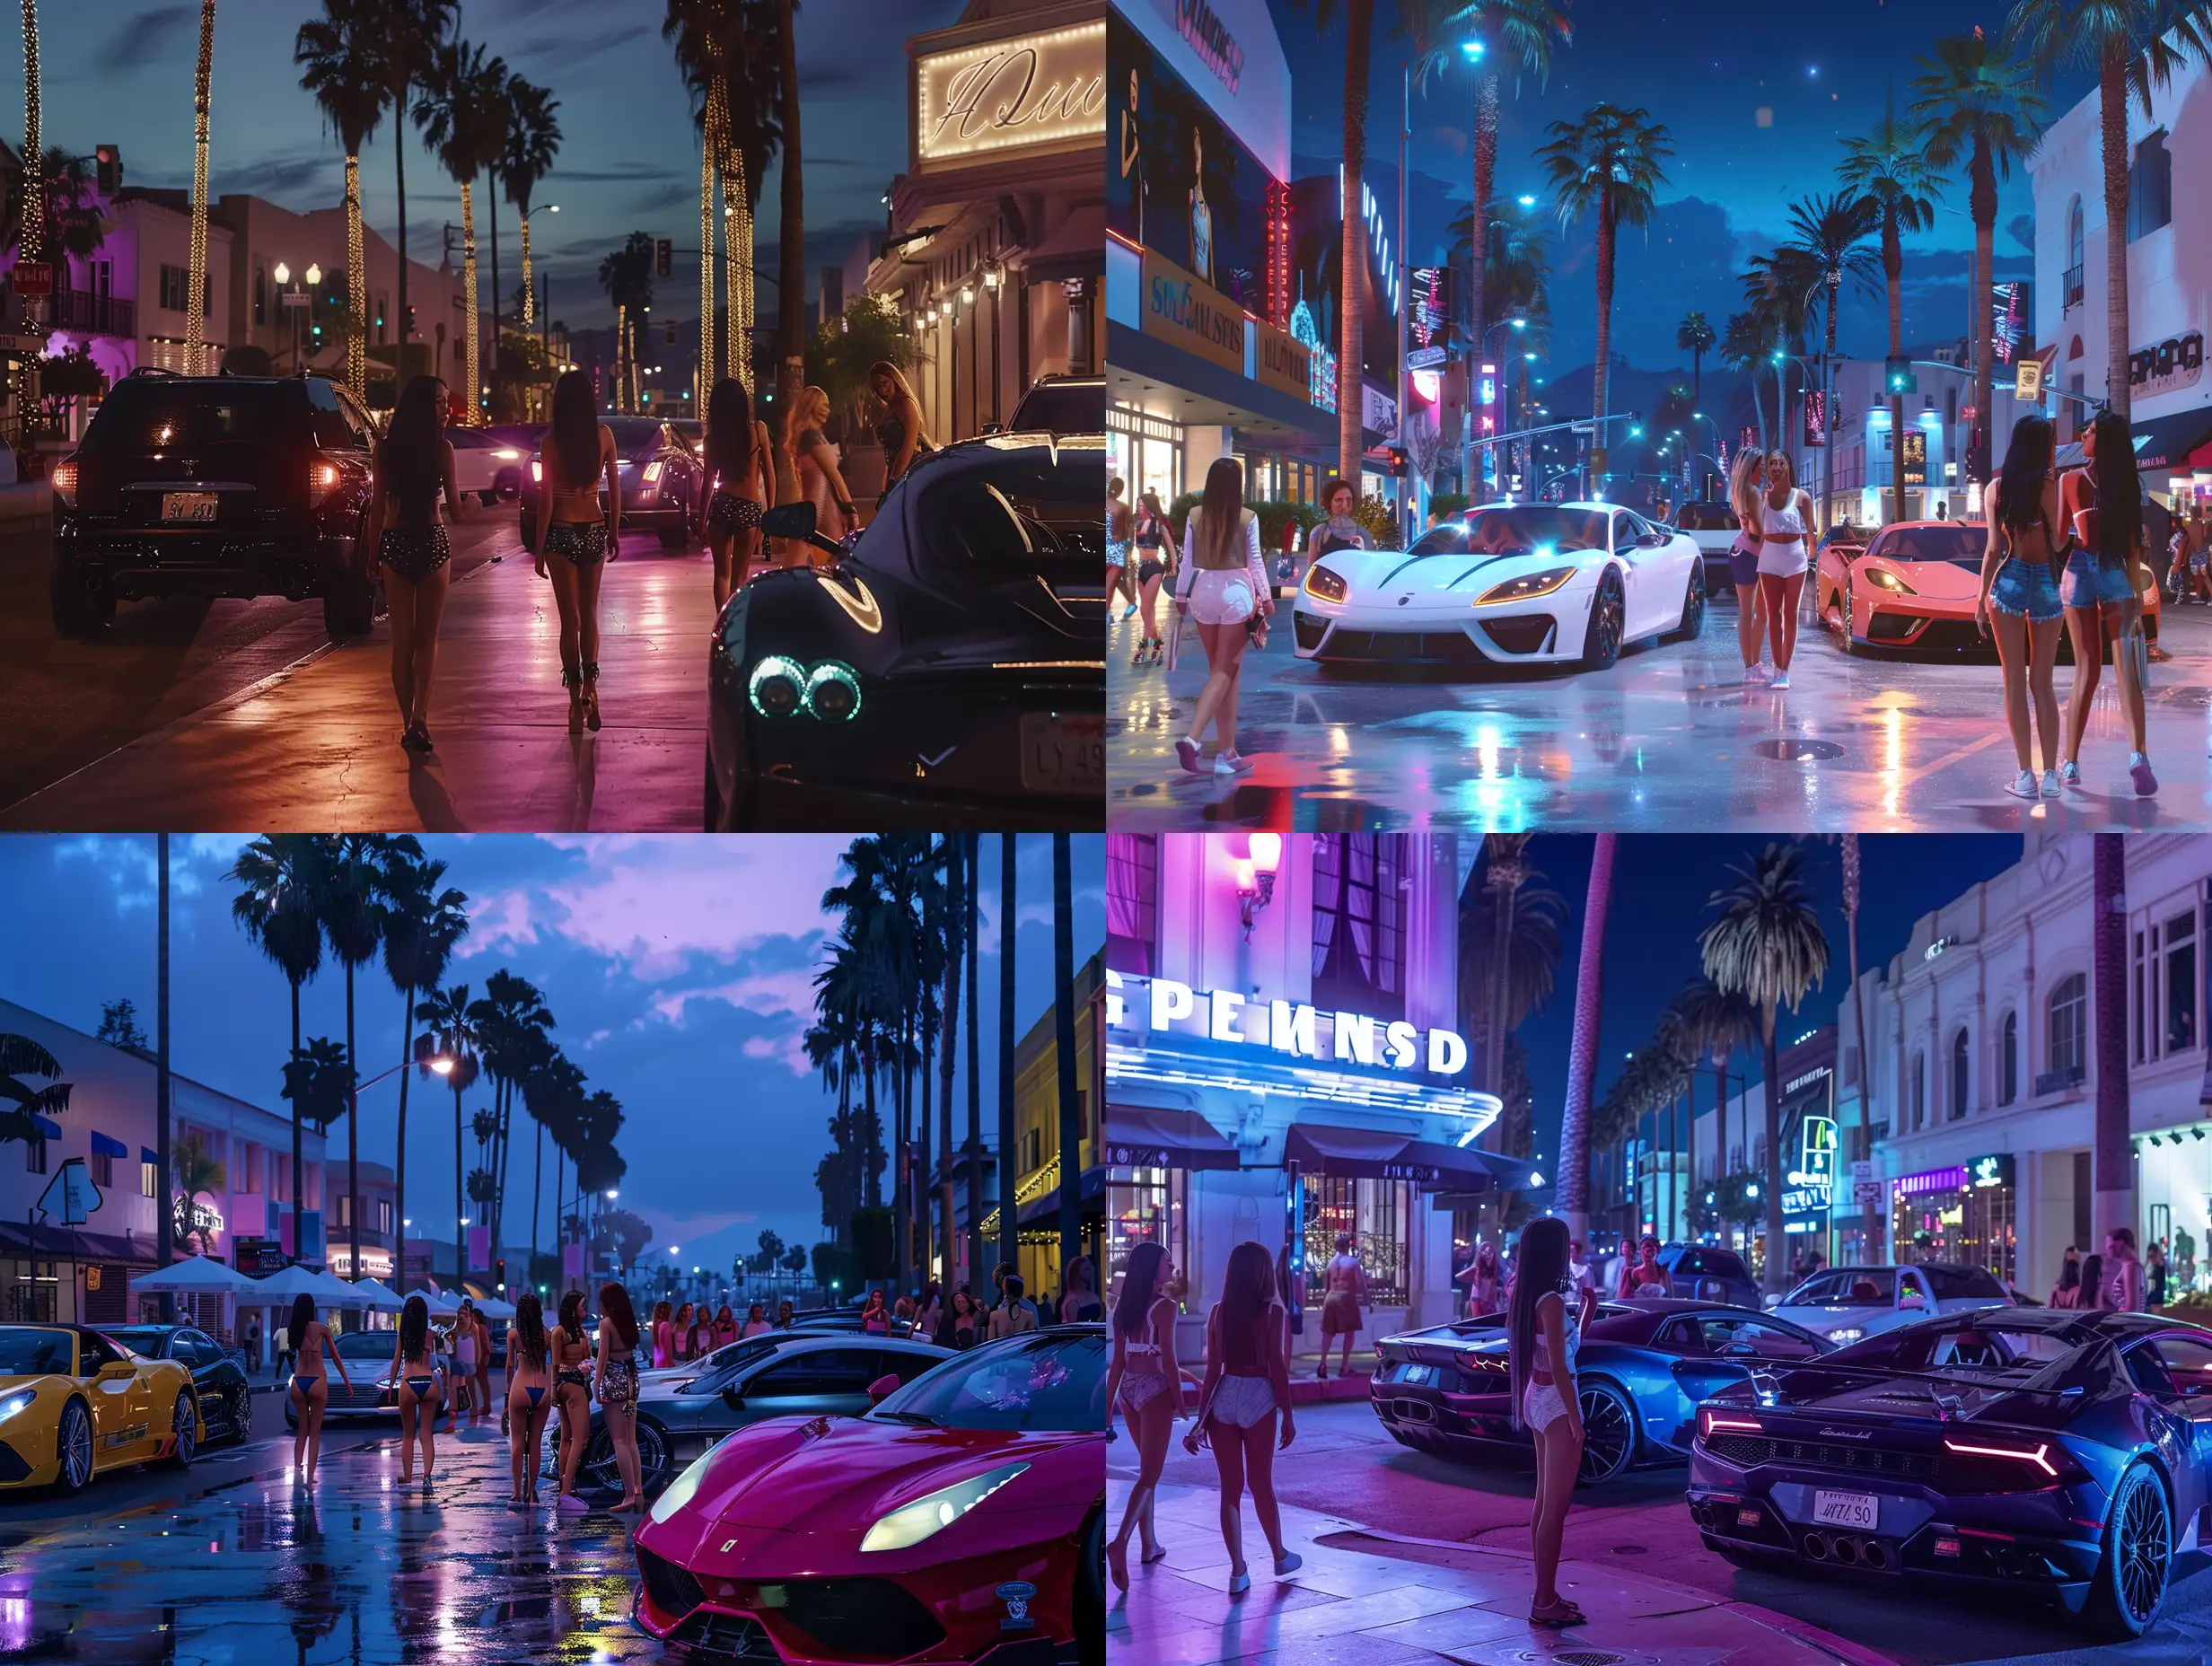 Late-Night-Stroll-on-Figueroa-Street-South-Los-Angeles-with-Girls-and-Luxury-Cars